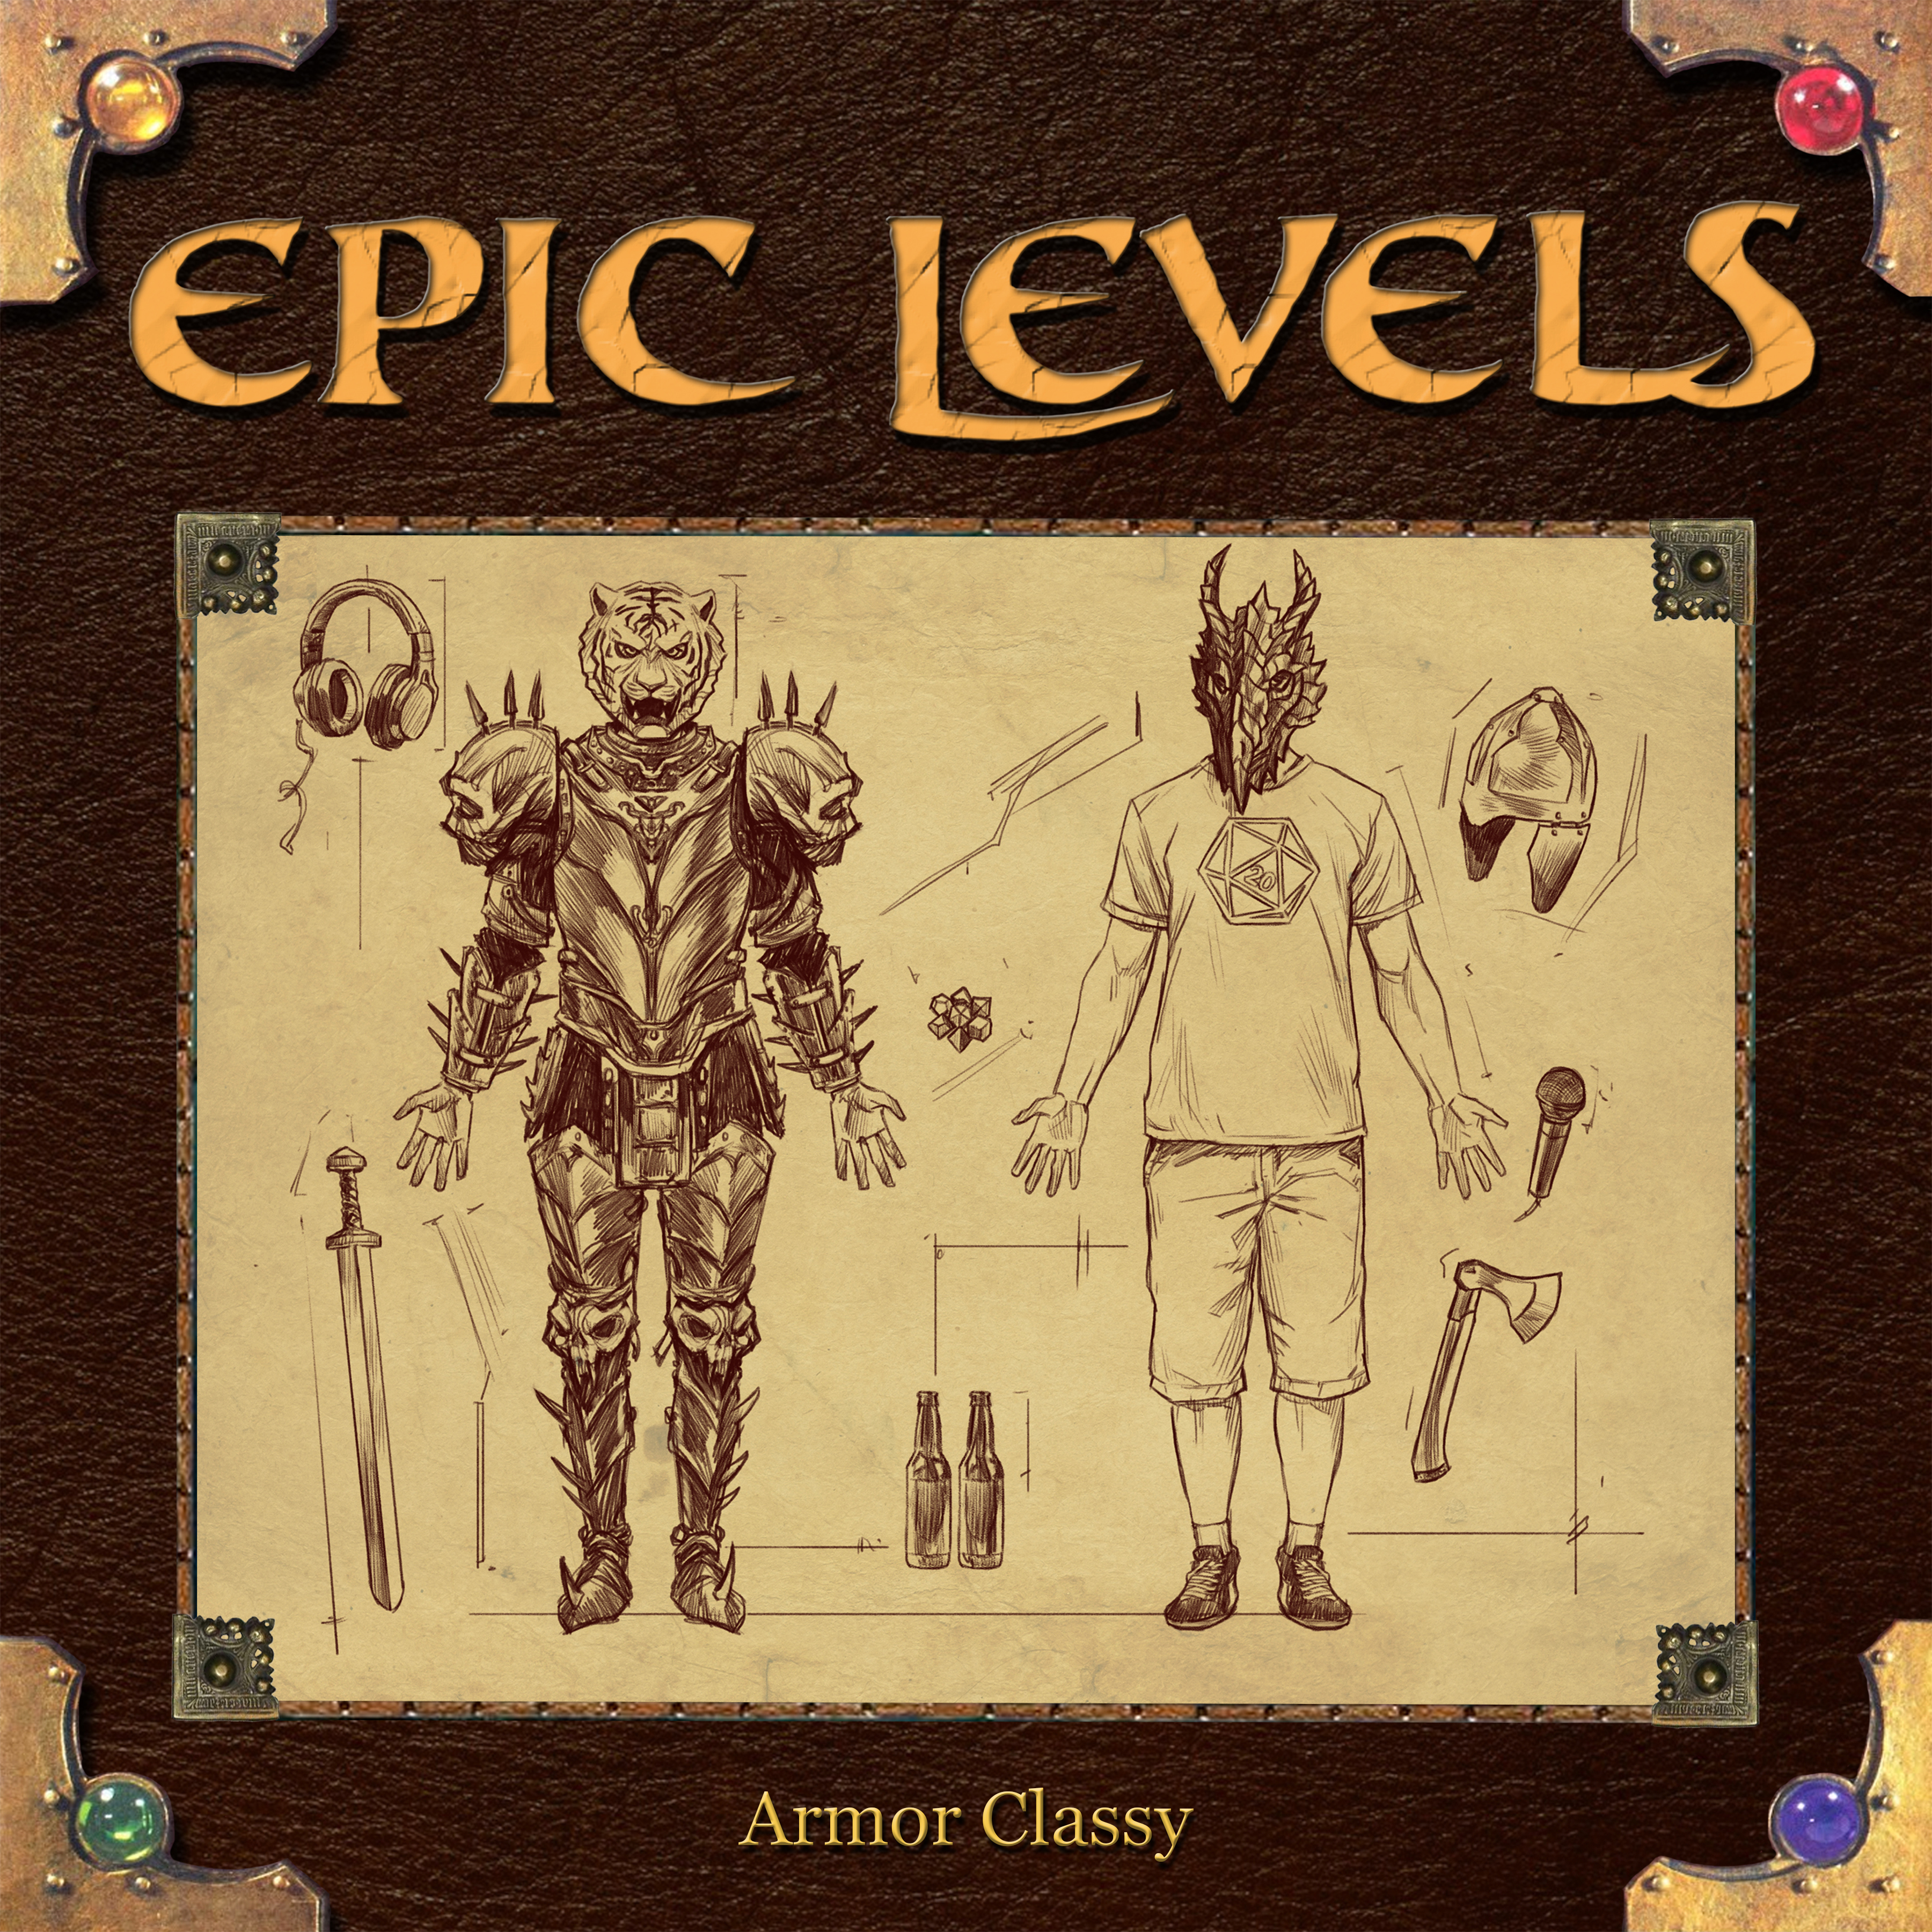 Epic Levels Armor Classy album cover art Dragon Warrior and Tiger Wizard with weapons swords and armor in the style of the dungeons and dragons 3E player's handbook